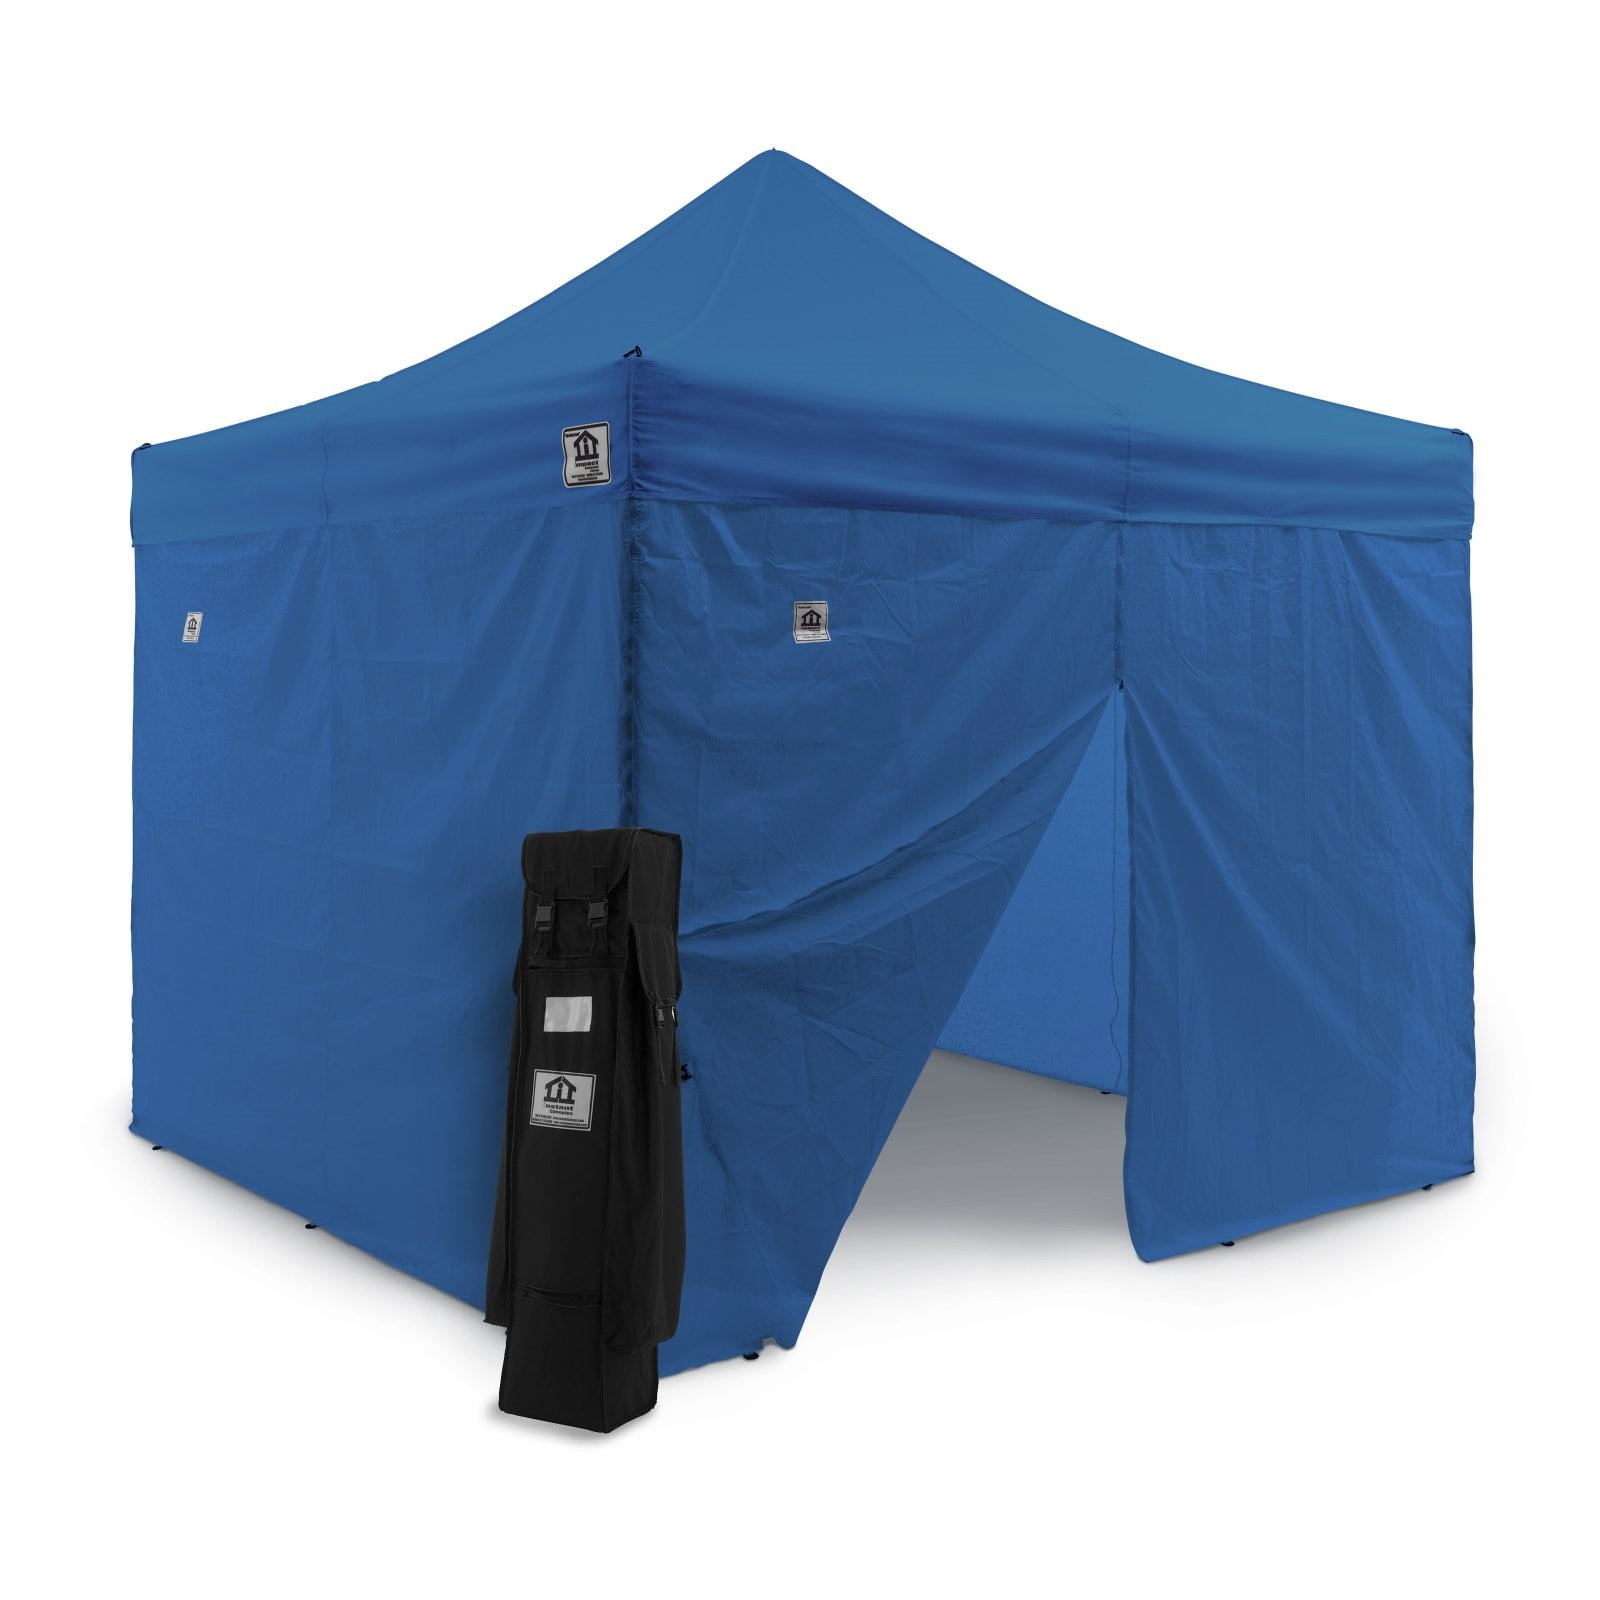 Sports Impact Canopy Roller Storage Bag for 10x10 Universal Pop Up Canopy Tent 